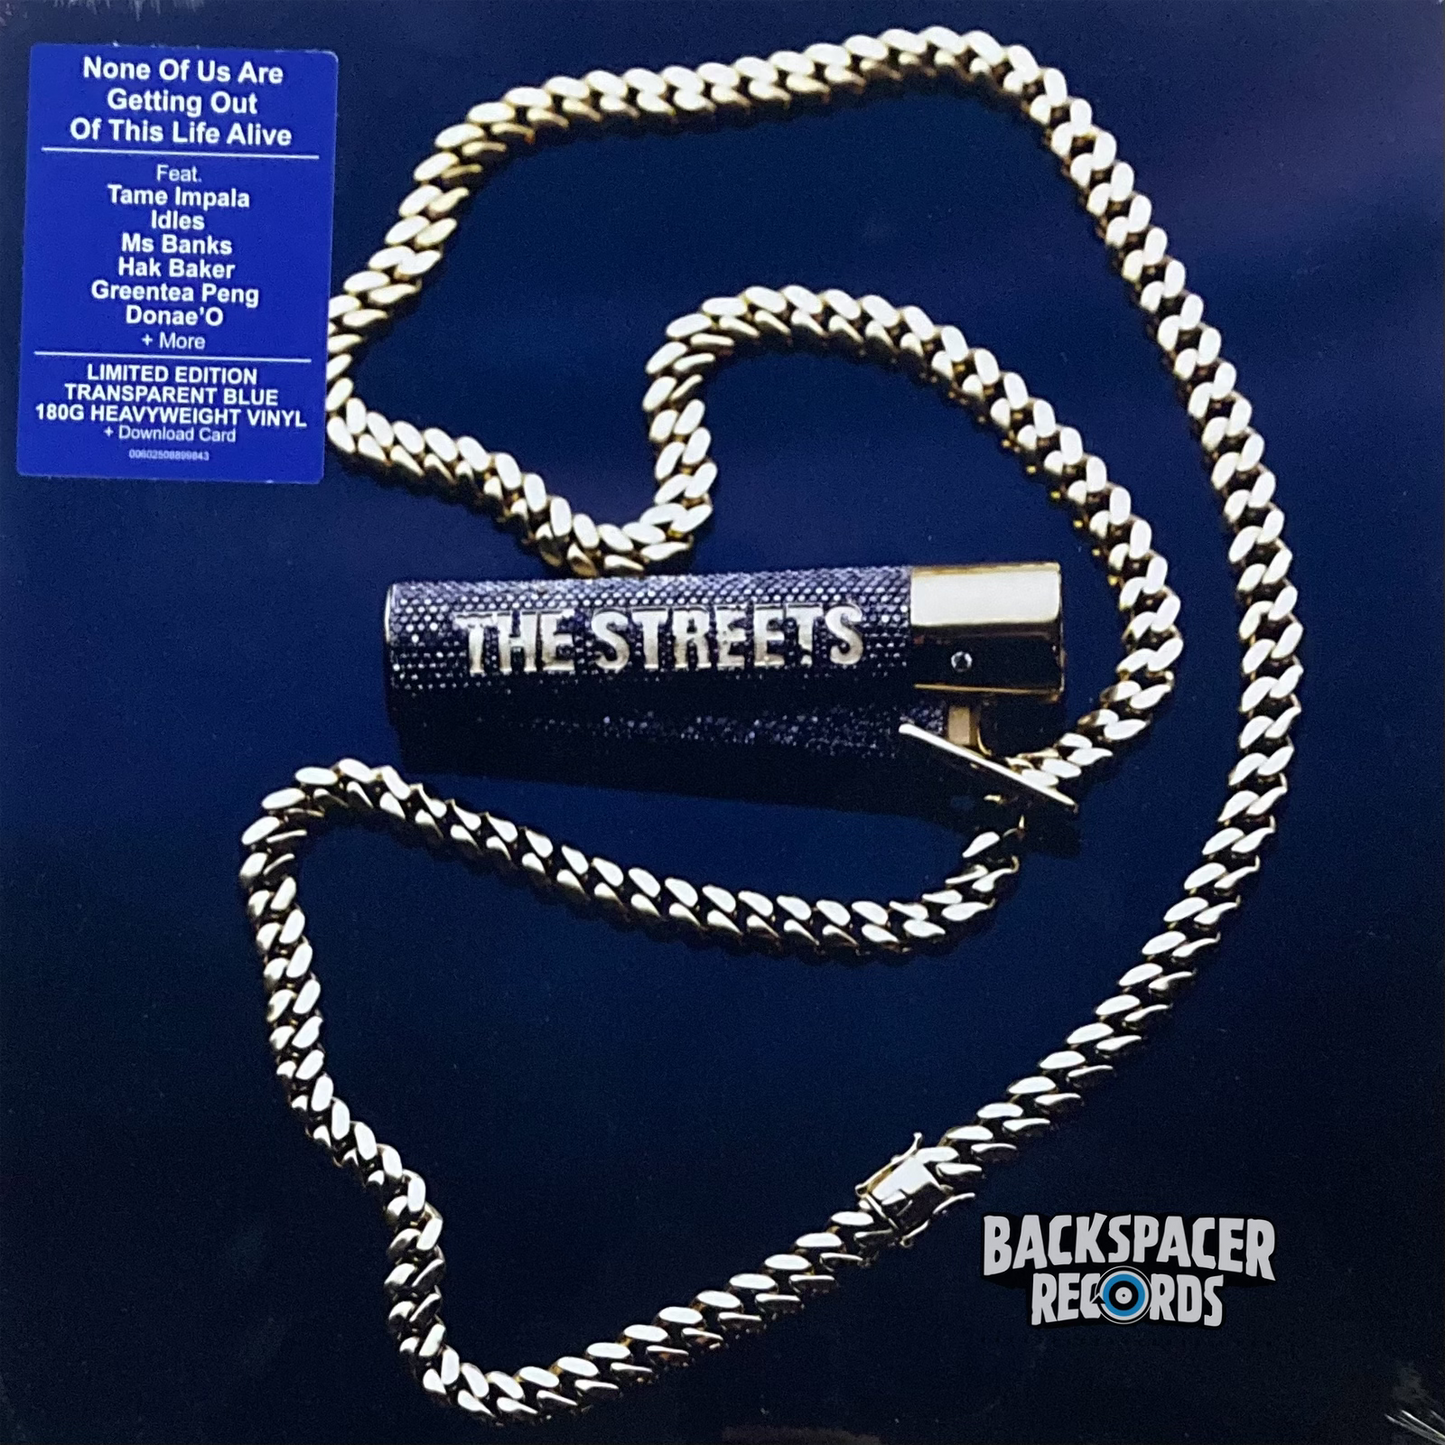 The Streets - None Of Us Are Getting Out Of This Life Alive (Limited Edition) LP (Sealed)